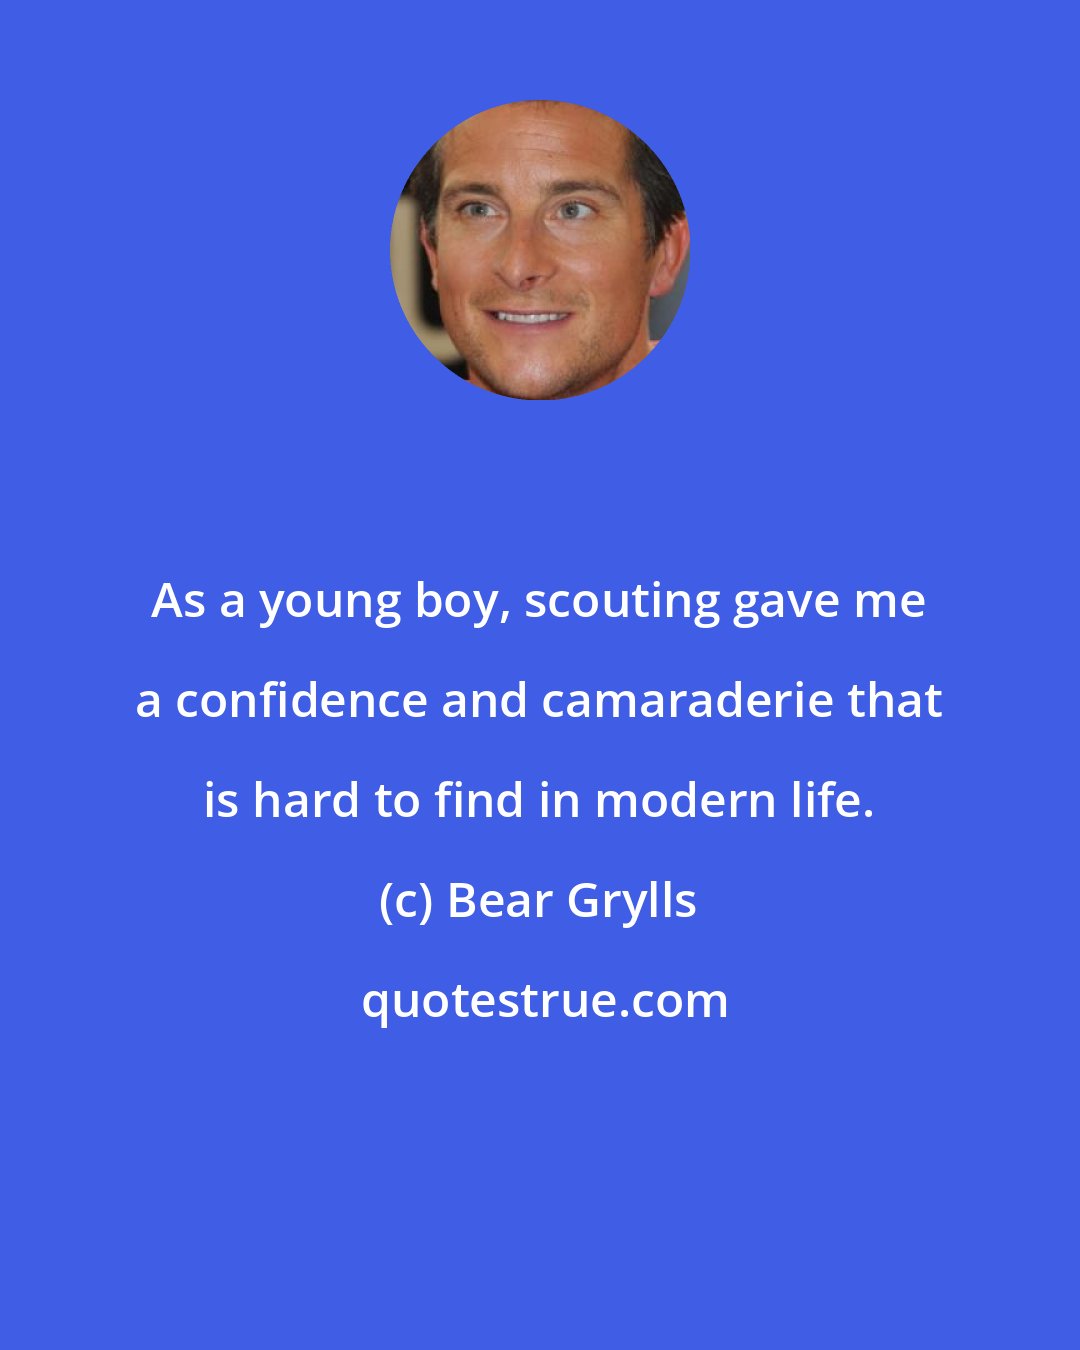 Bear Grylls: As a young boy, scouting gave me a confidence and camaraderie that is hard to find in modern life.